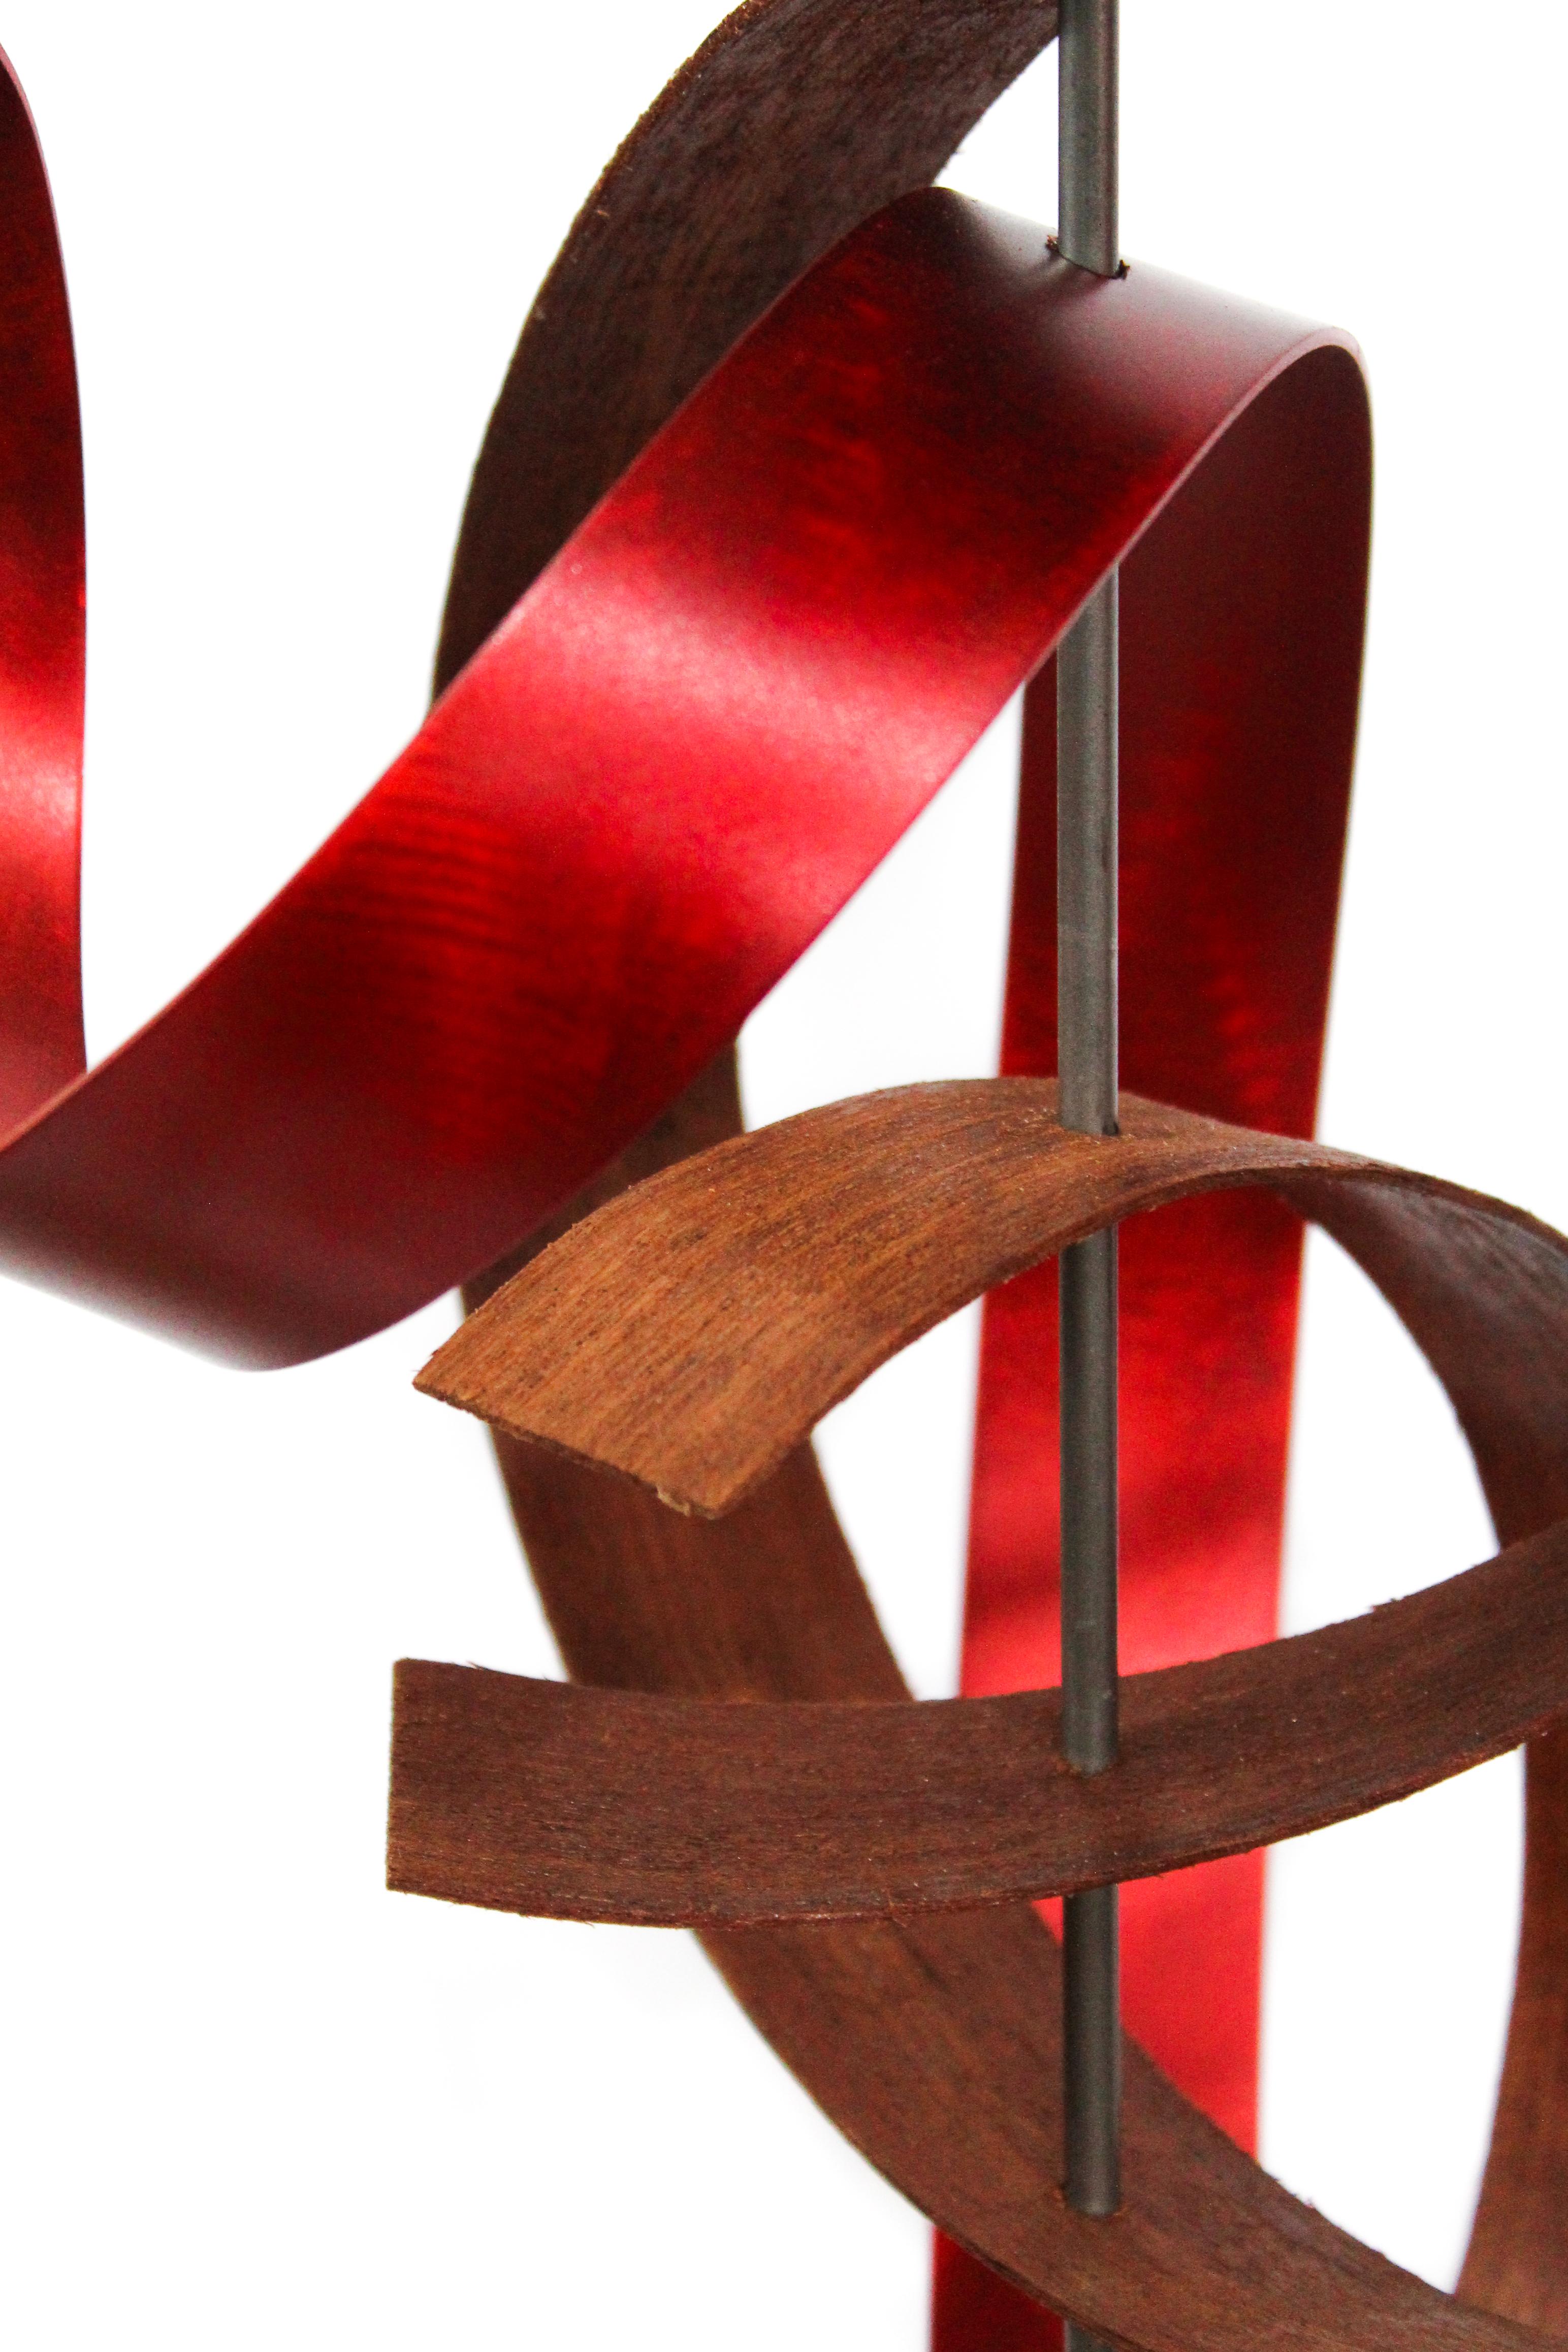 Contemporary Wood Metal Sculpture Art, Mid-Century Modern Inspired, by Jeff L. 3